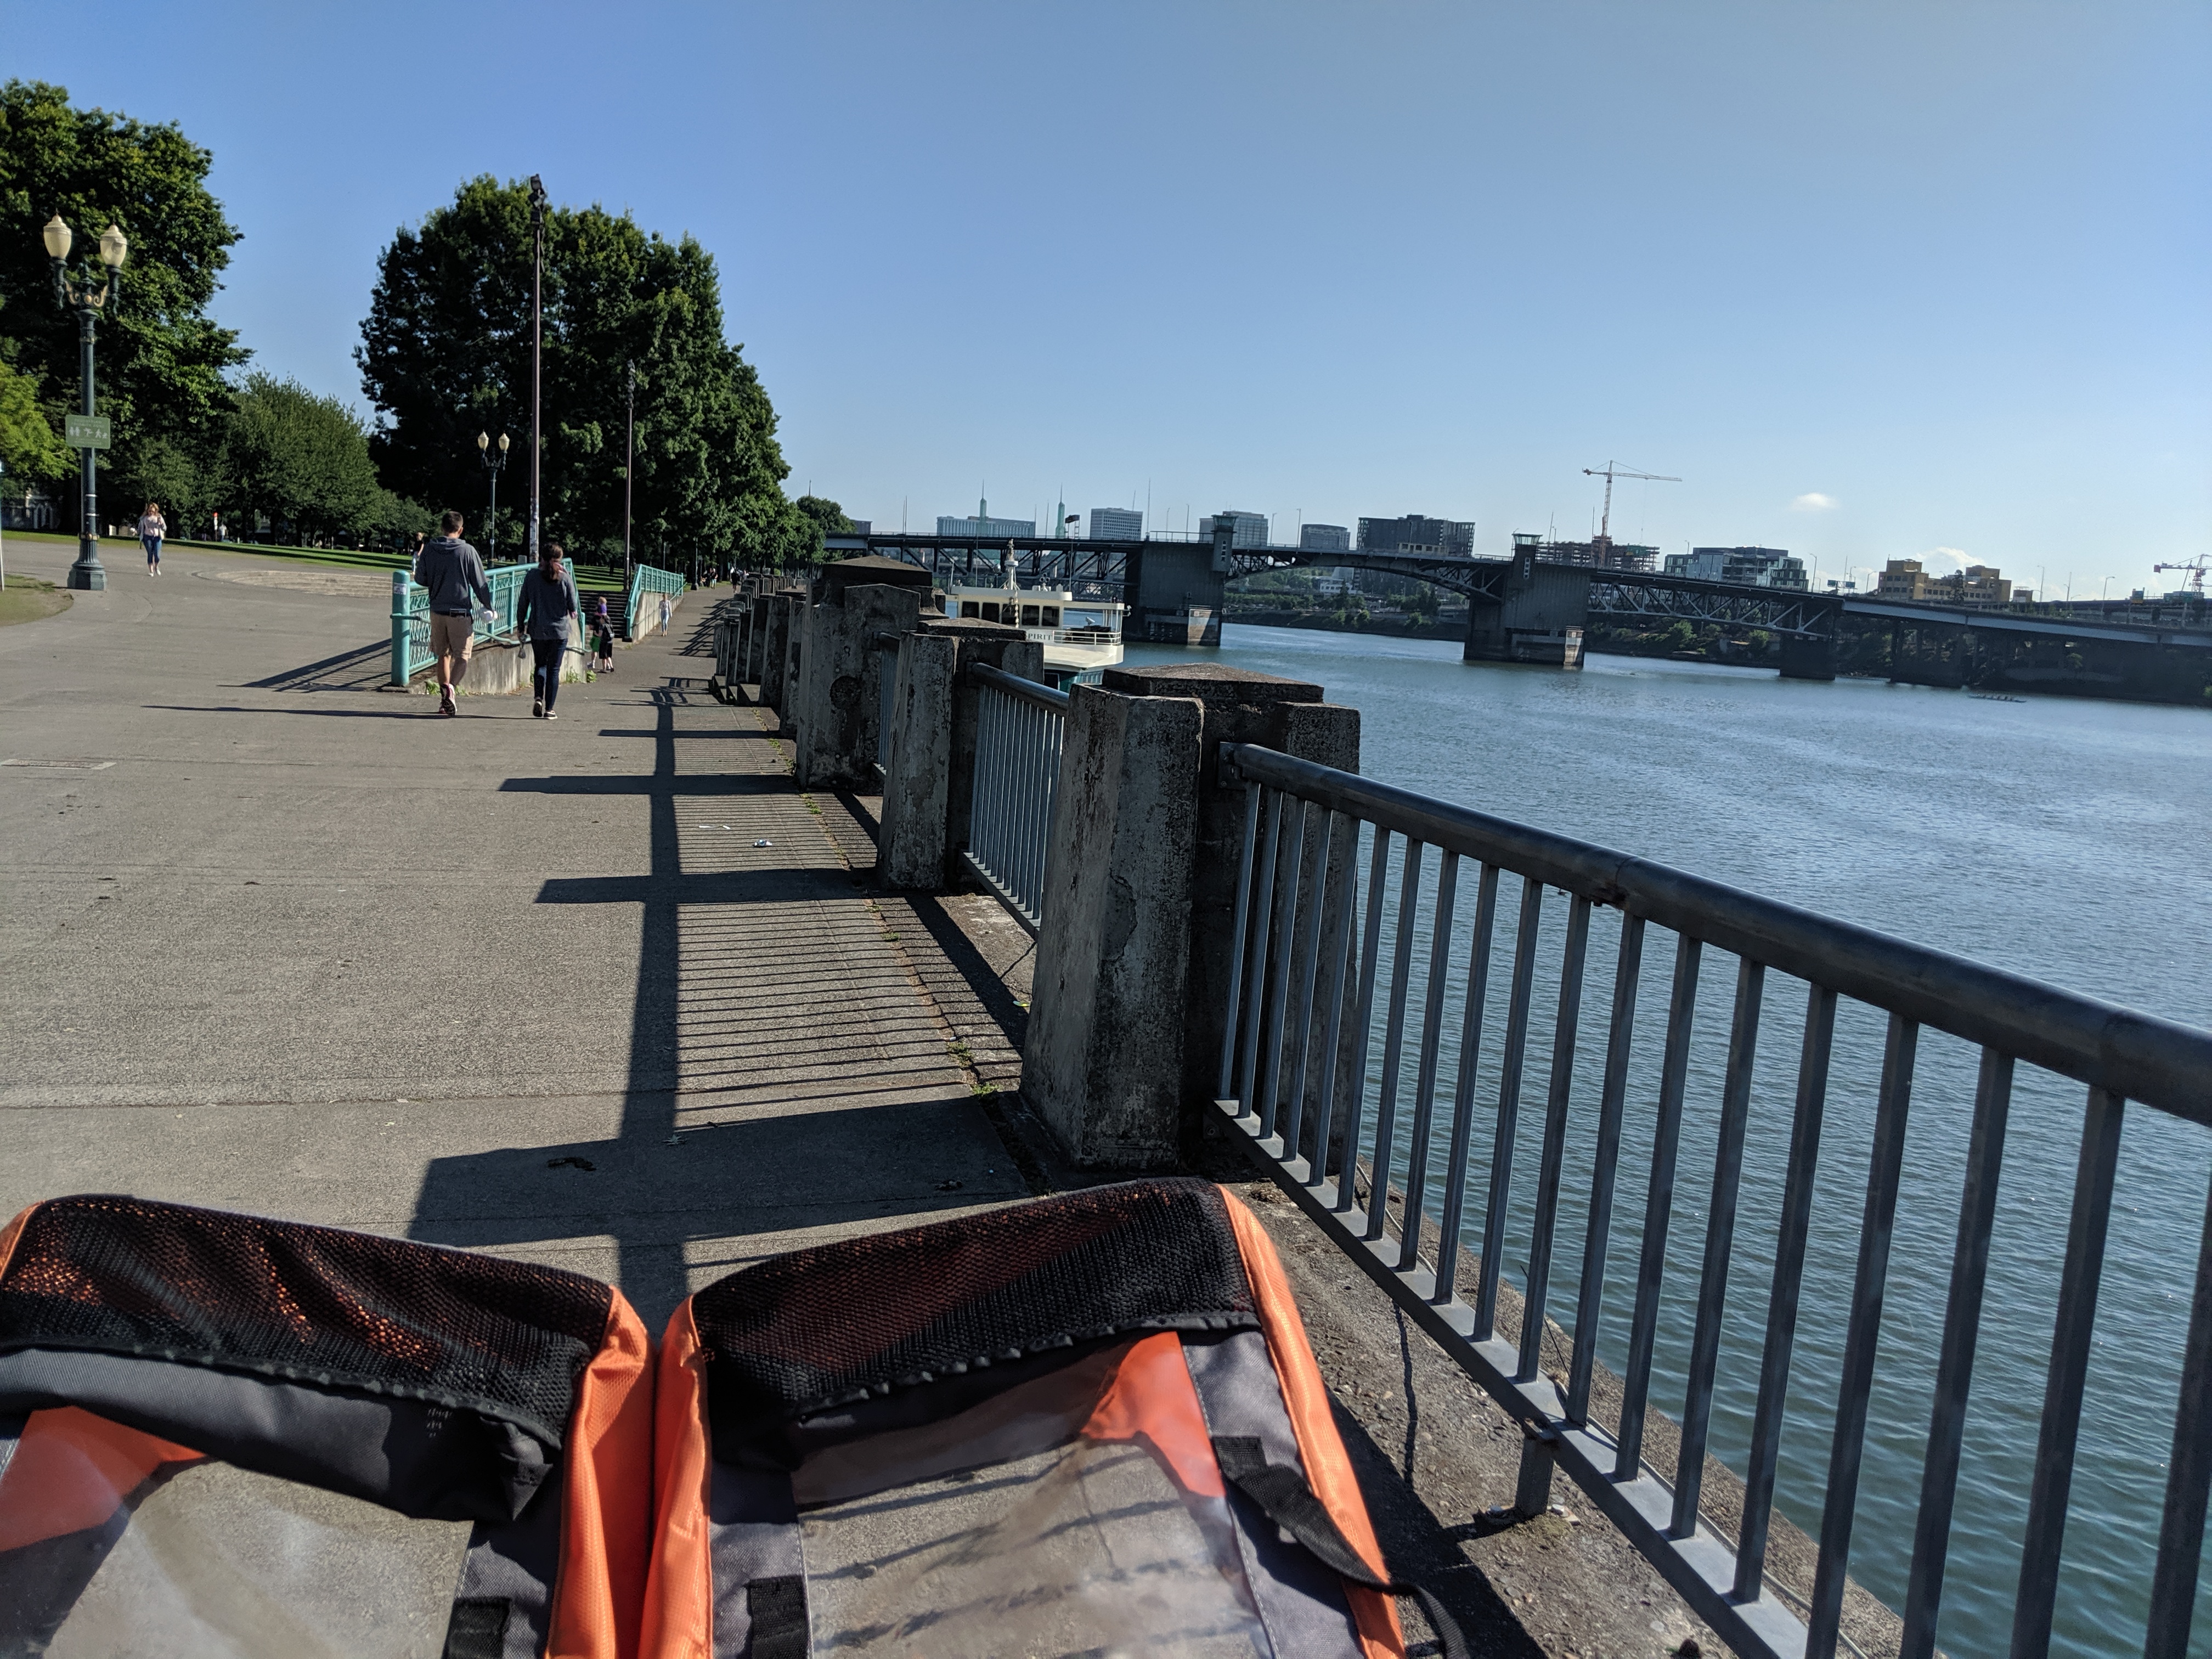 double stroller in the bottom left corner, view of the Burnside Bridge and the Willamette River to the right.